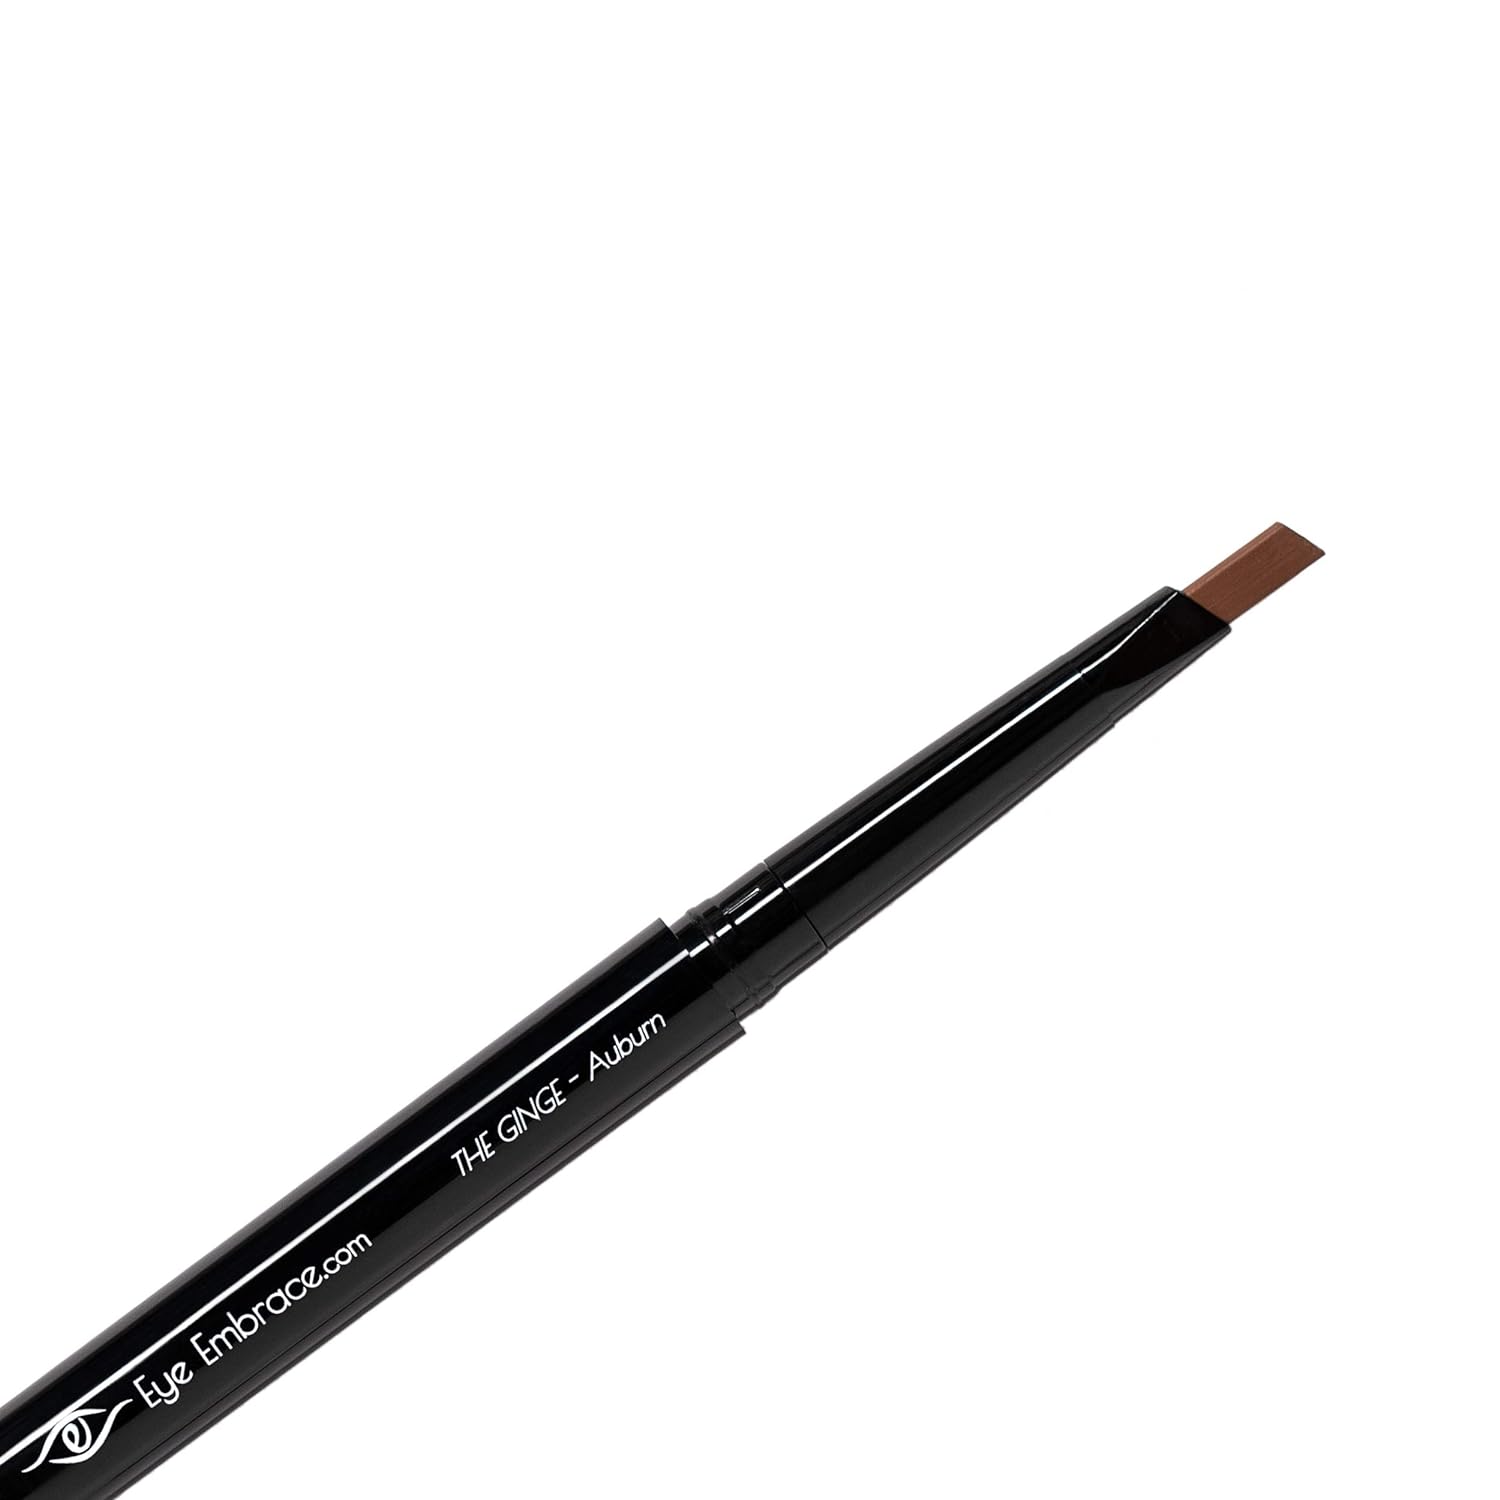 Eye Embrace The Ginge: Auburn Red Eyebrow Pencil – Waterproof, Double-Ended Automatic Angled Tip & Spoolie Brush, Cruelty-Free